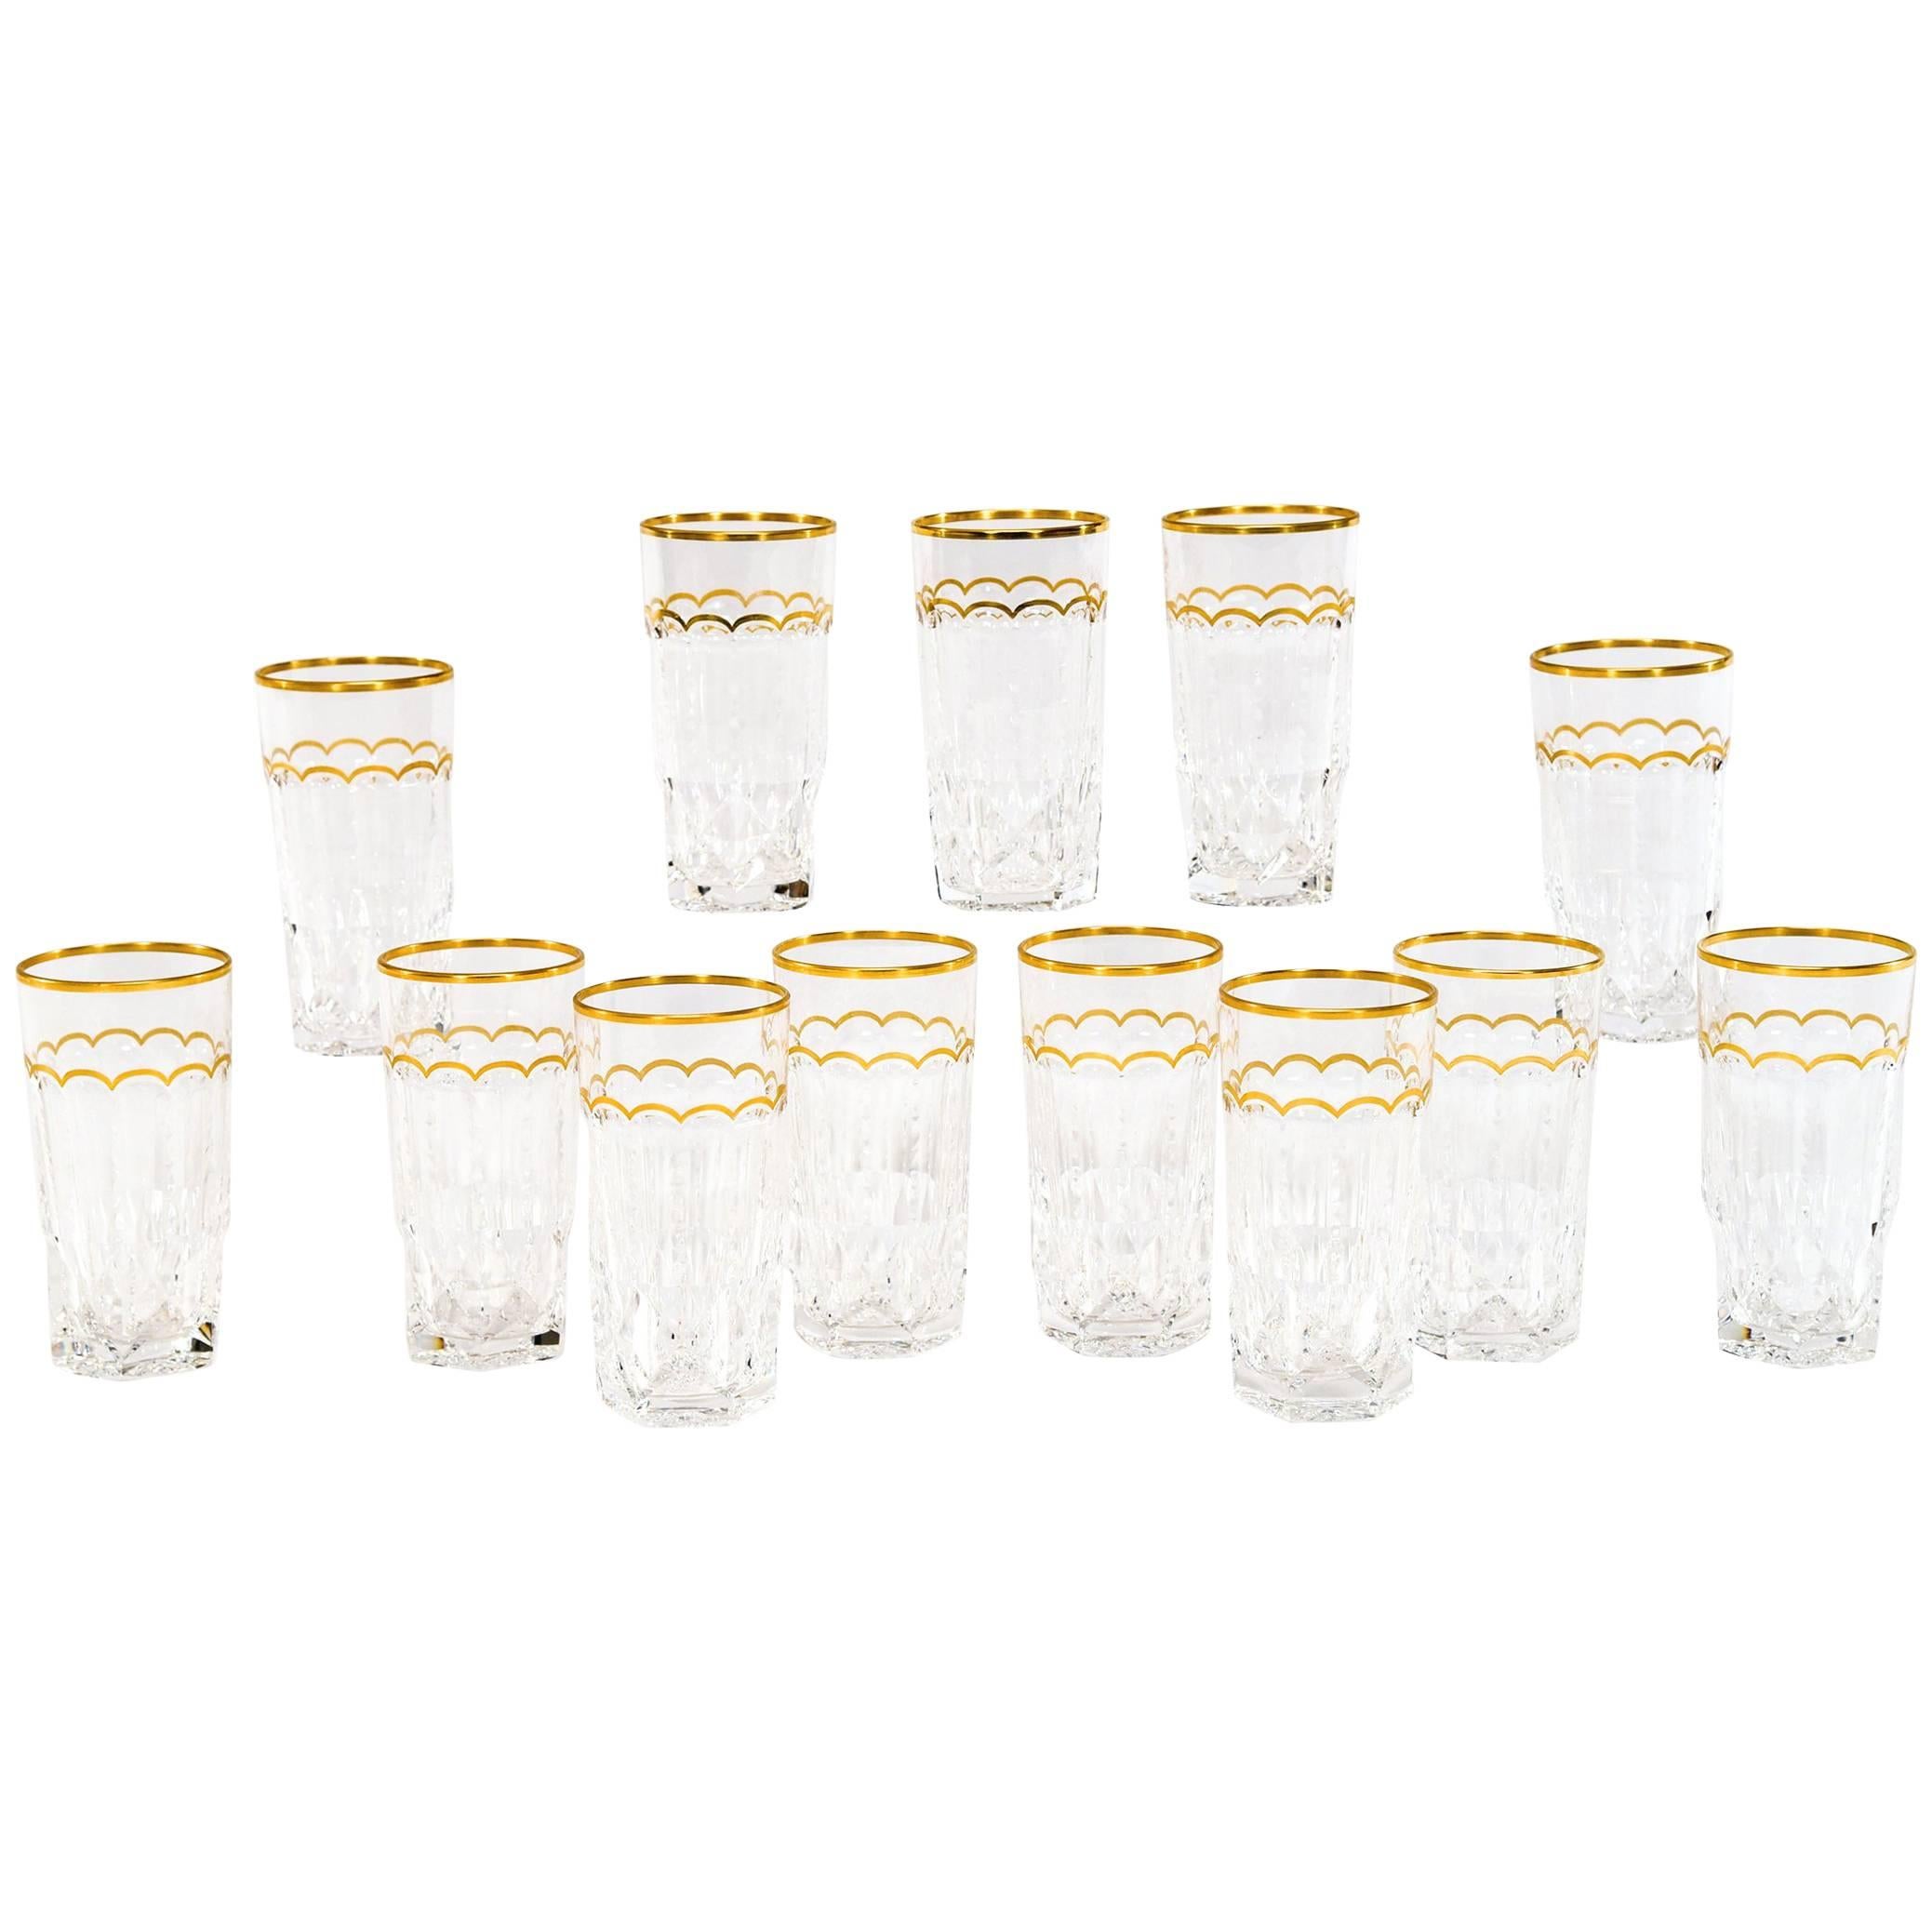 Set of 13 St. Louis Crystal Excellence Pattern Waters Tumblers Highballs